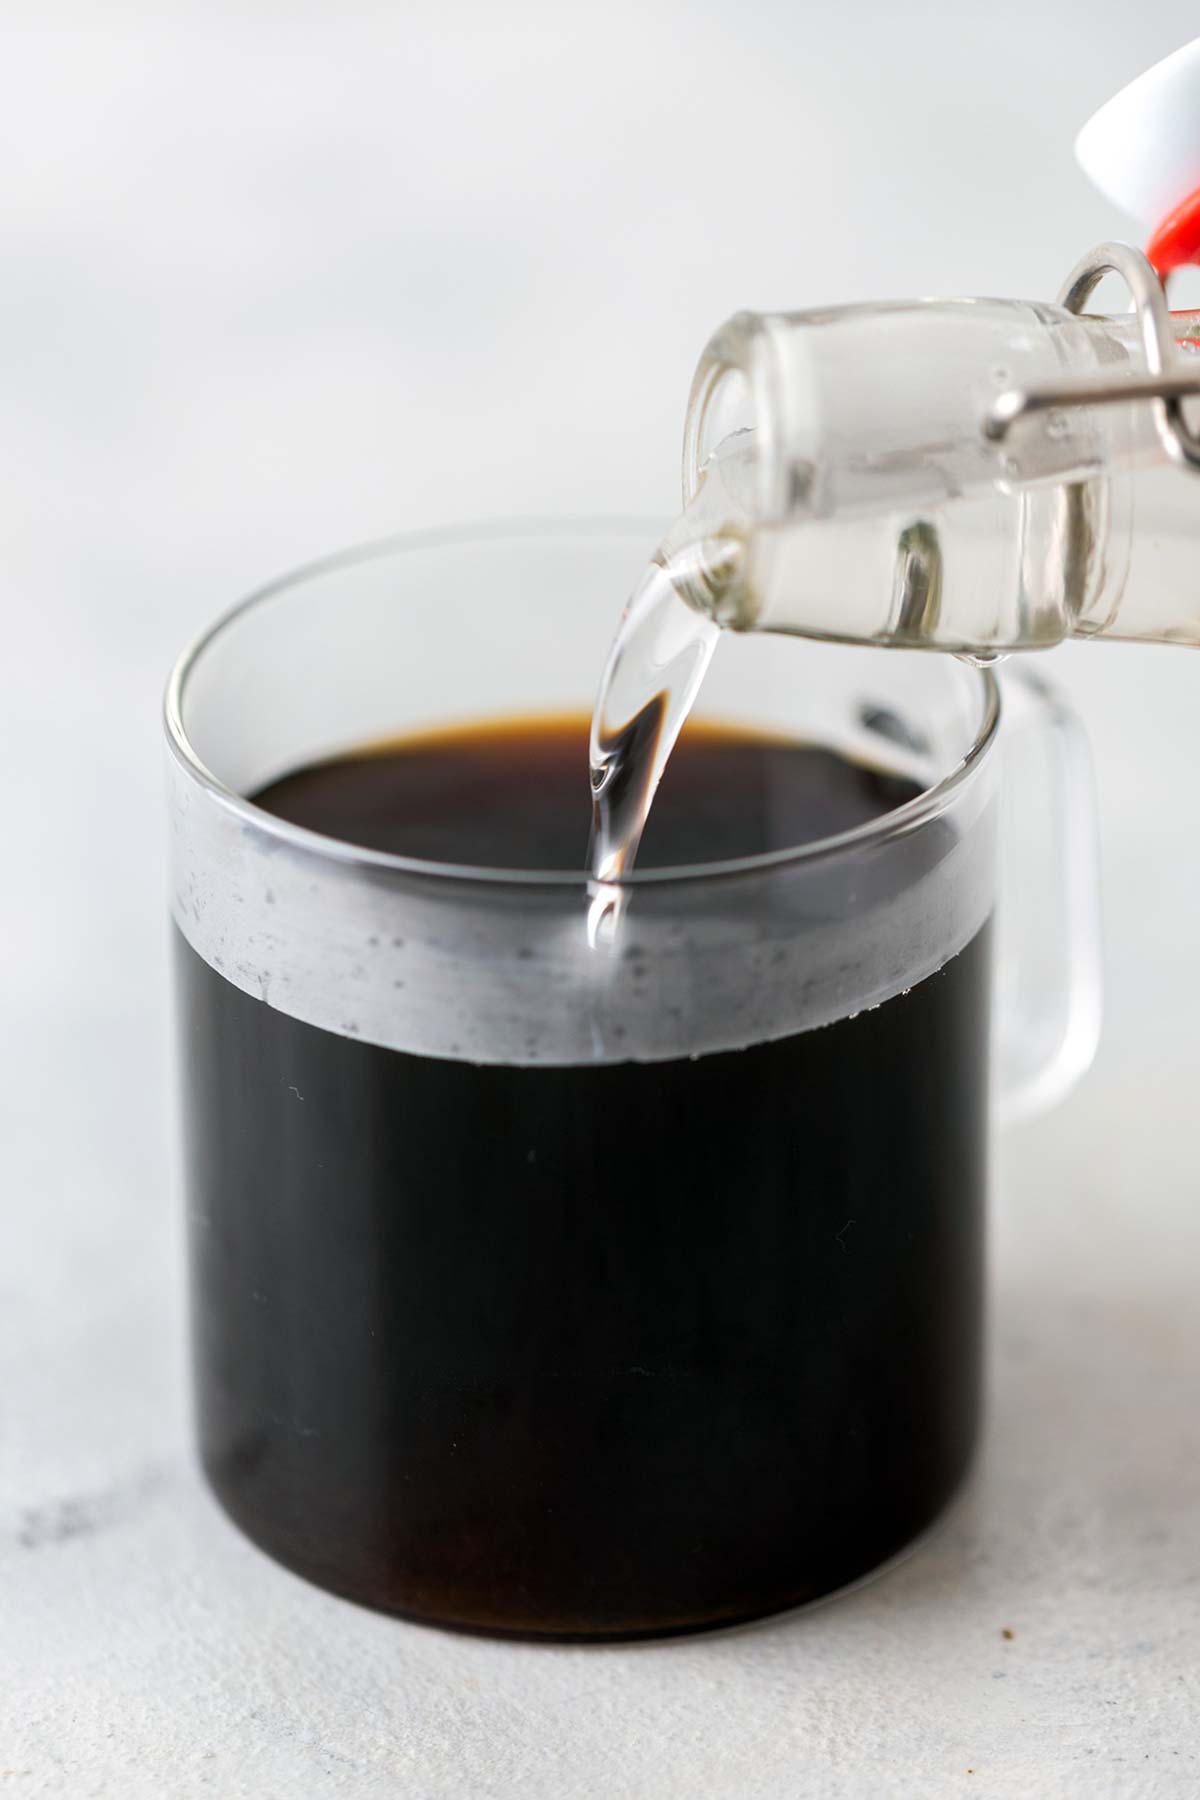 A bottle of classic syrup being poured into a cup of coffee.